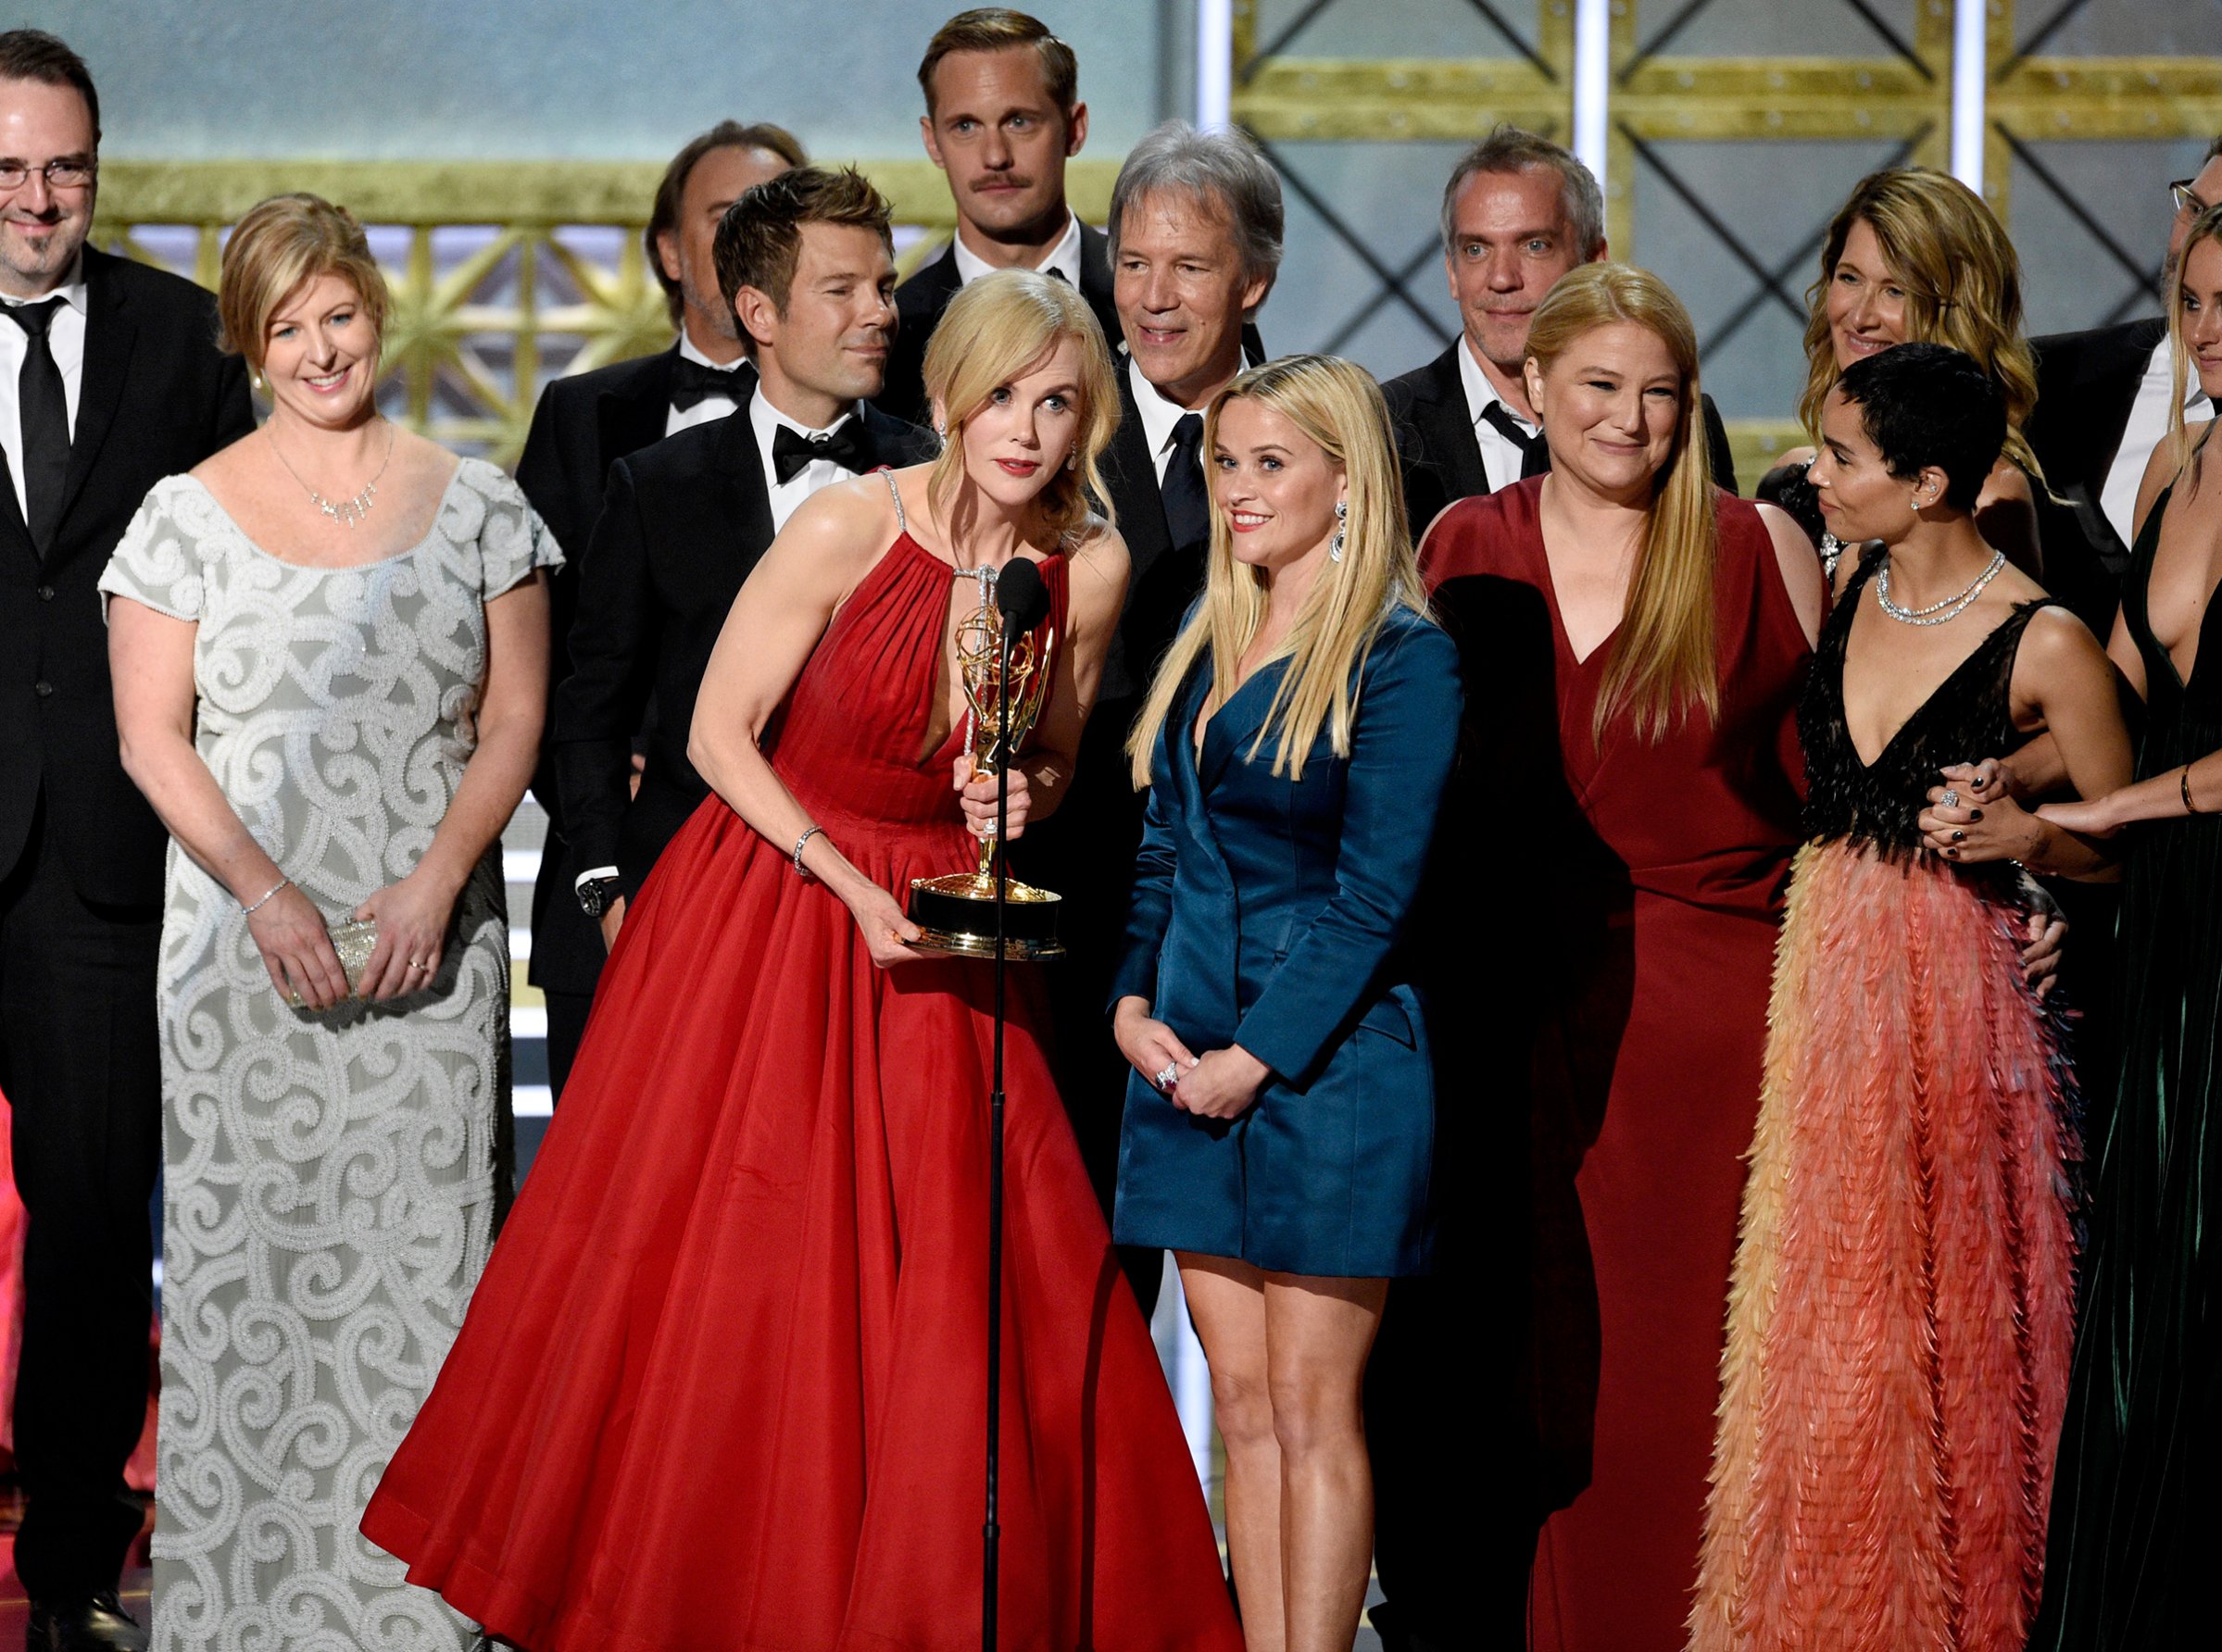 Nicole Kidman, center left, Reese Witherspoon, center right, and cast and crew accept the award for outstanding limited series for "Big Little Lies" at the 69th Primetime Emmy Awards on Sept. 17, 2017, at the Microsoft Theater in Los Angeles.